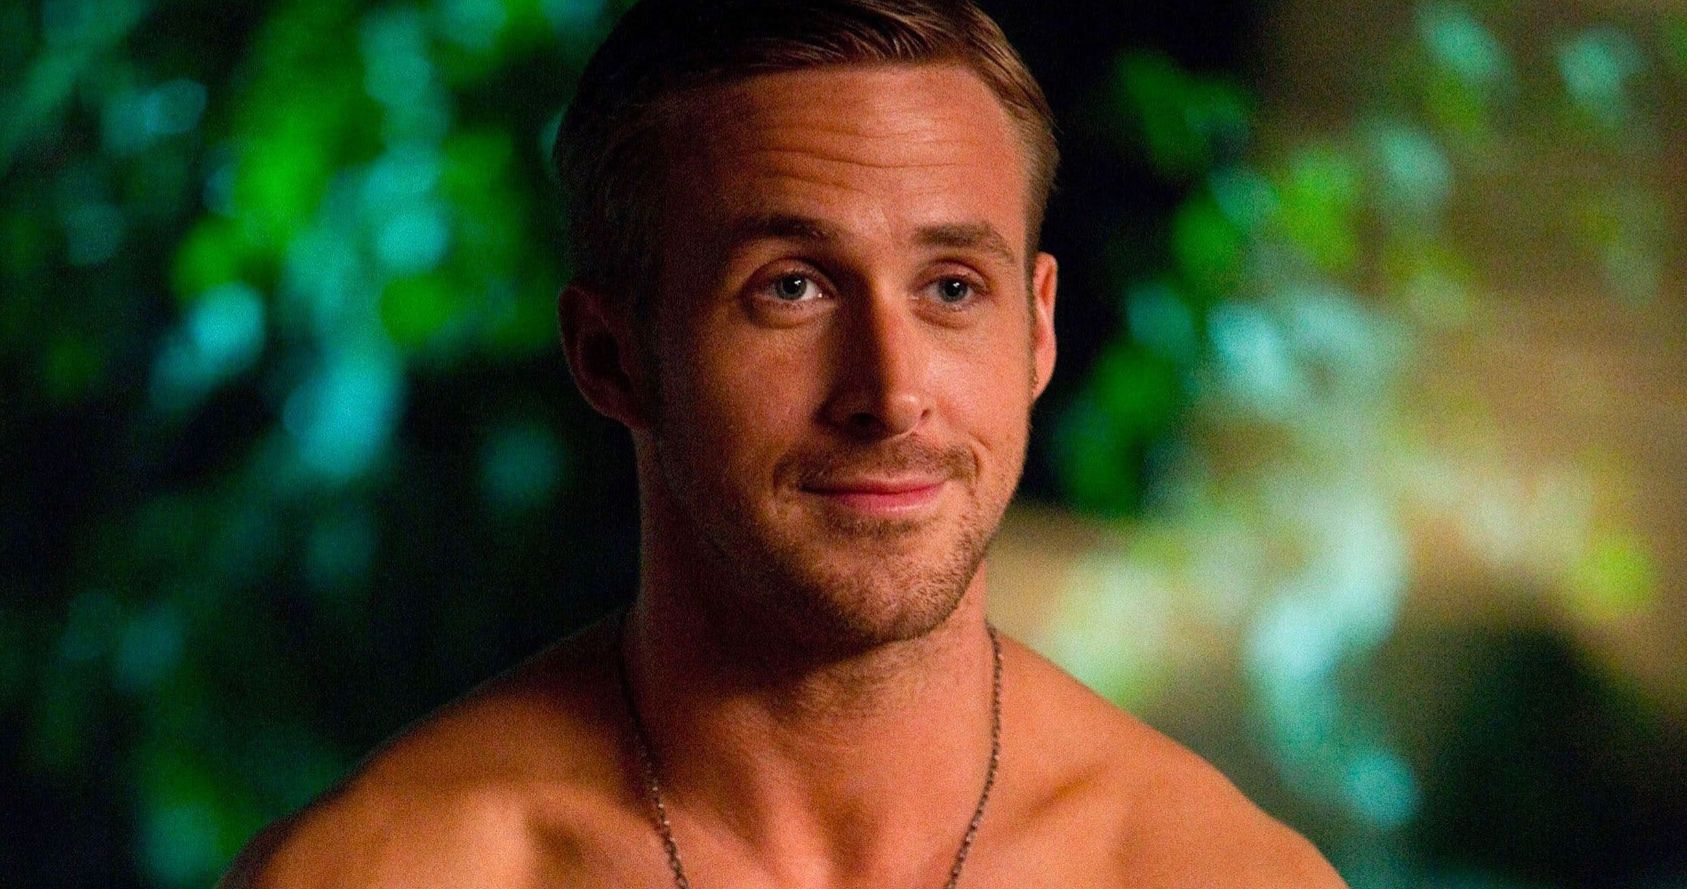 Ryan Gosling is shirtless and smiling in Crazy Stupid Love